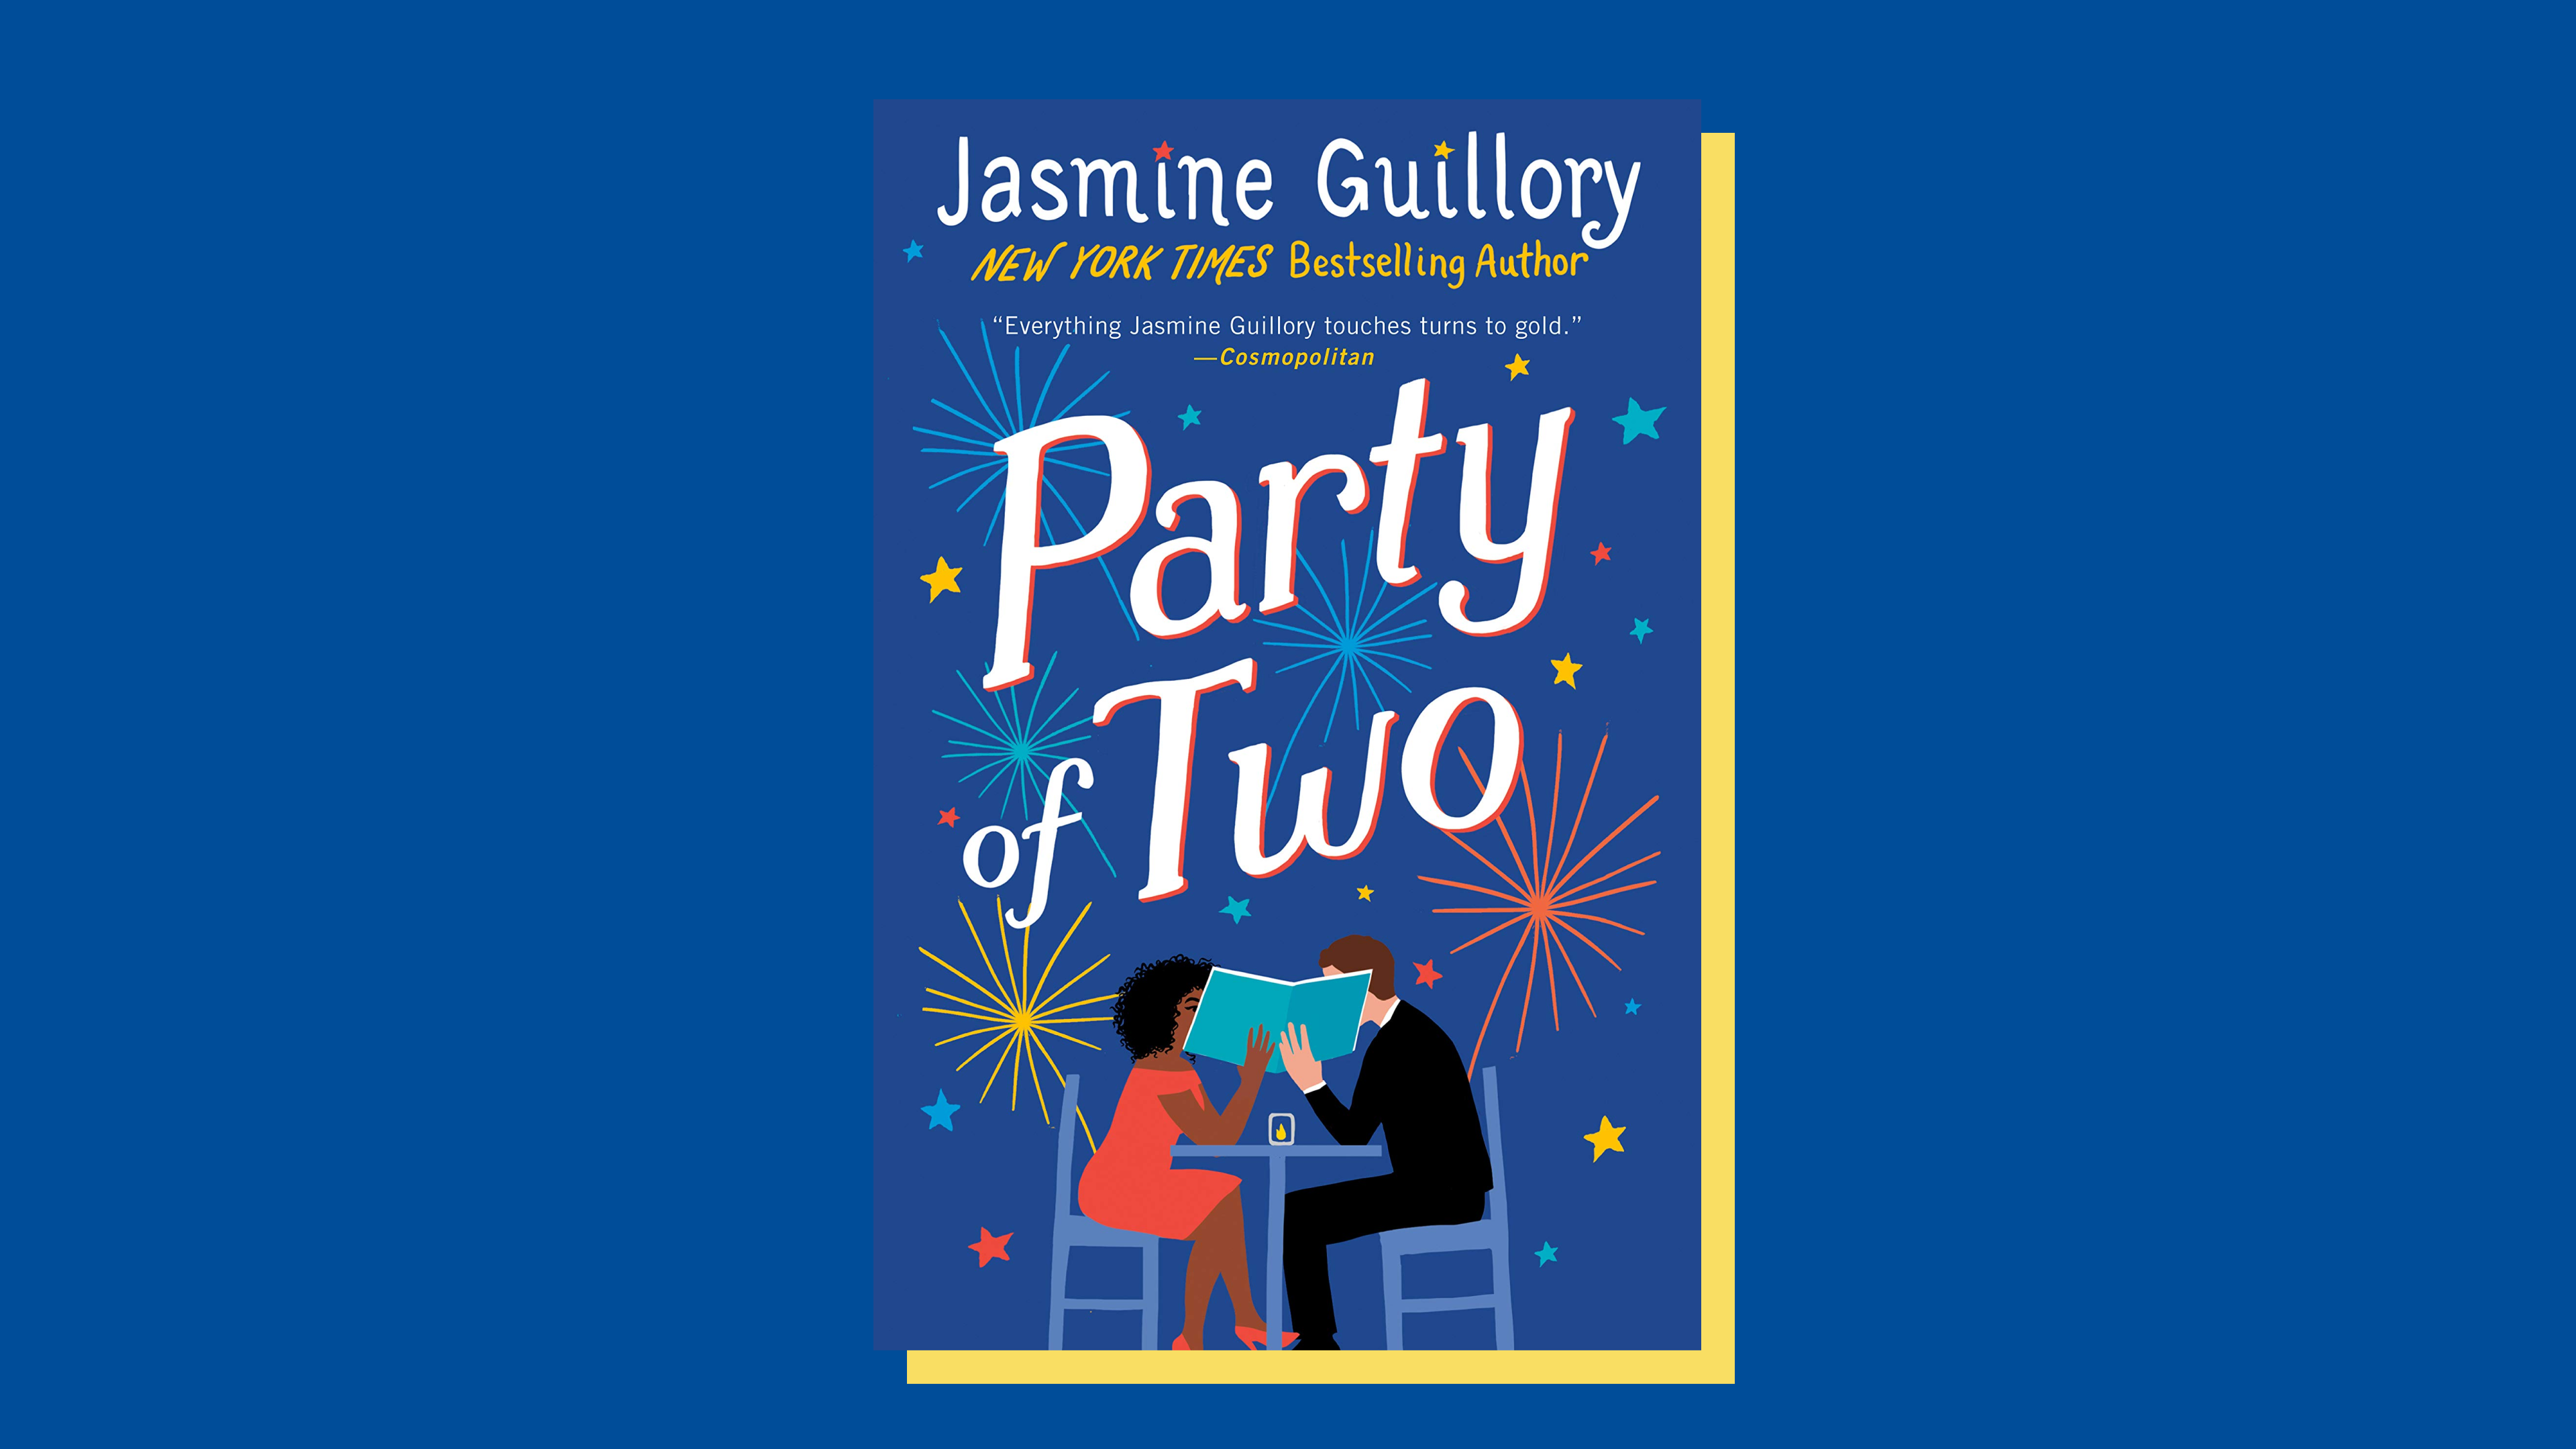 “Party of Two“ by Jasmine Guillory